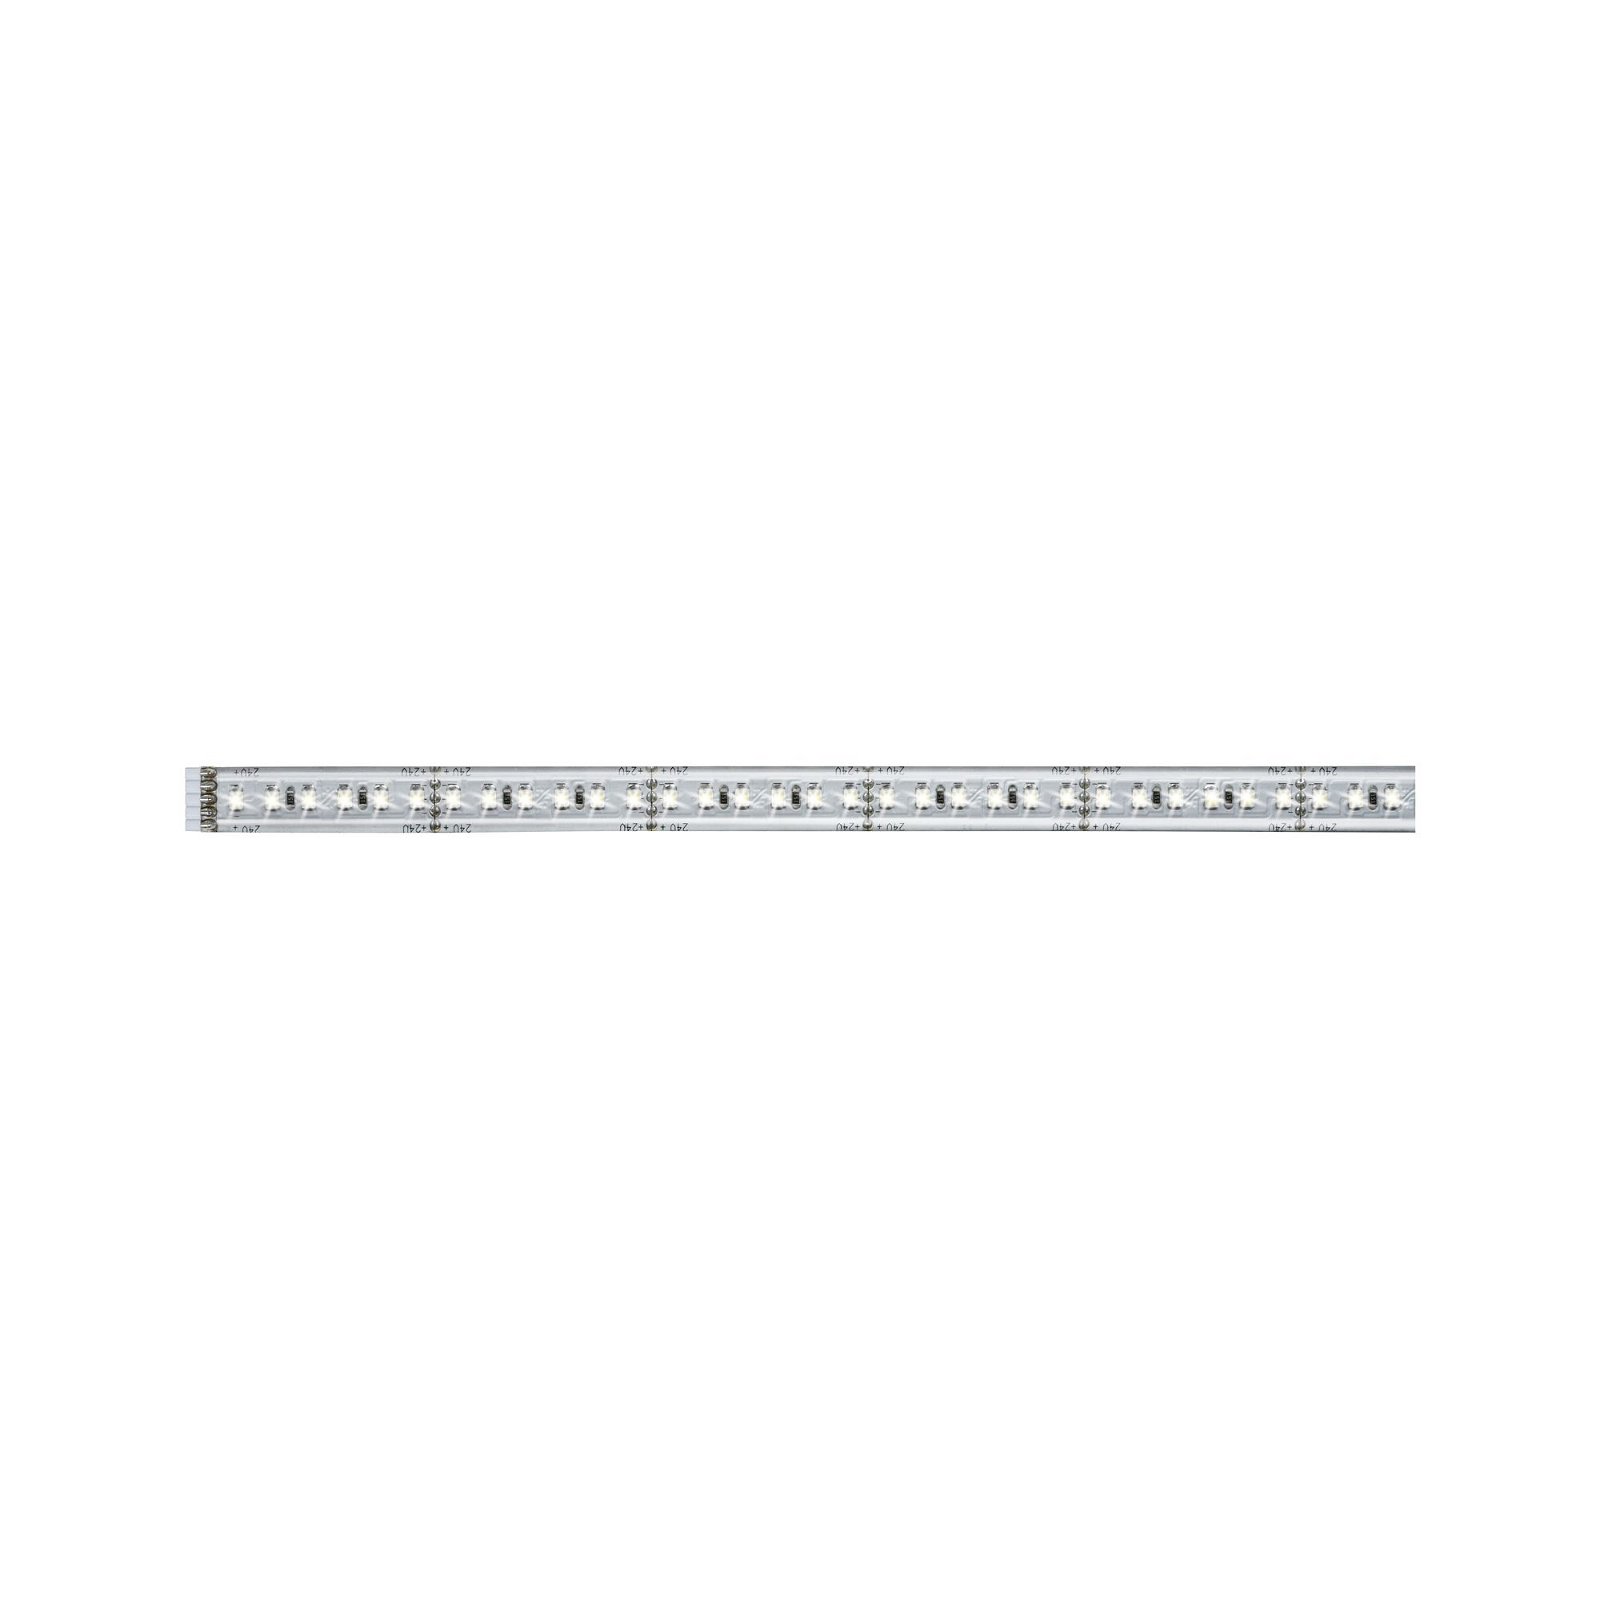 MaxLED 1000 LED Strip Warm white 1m protect cover 12W 880lm/m 2700K